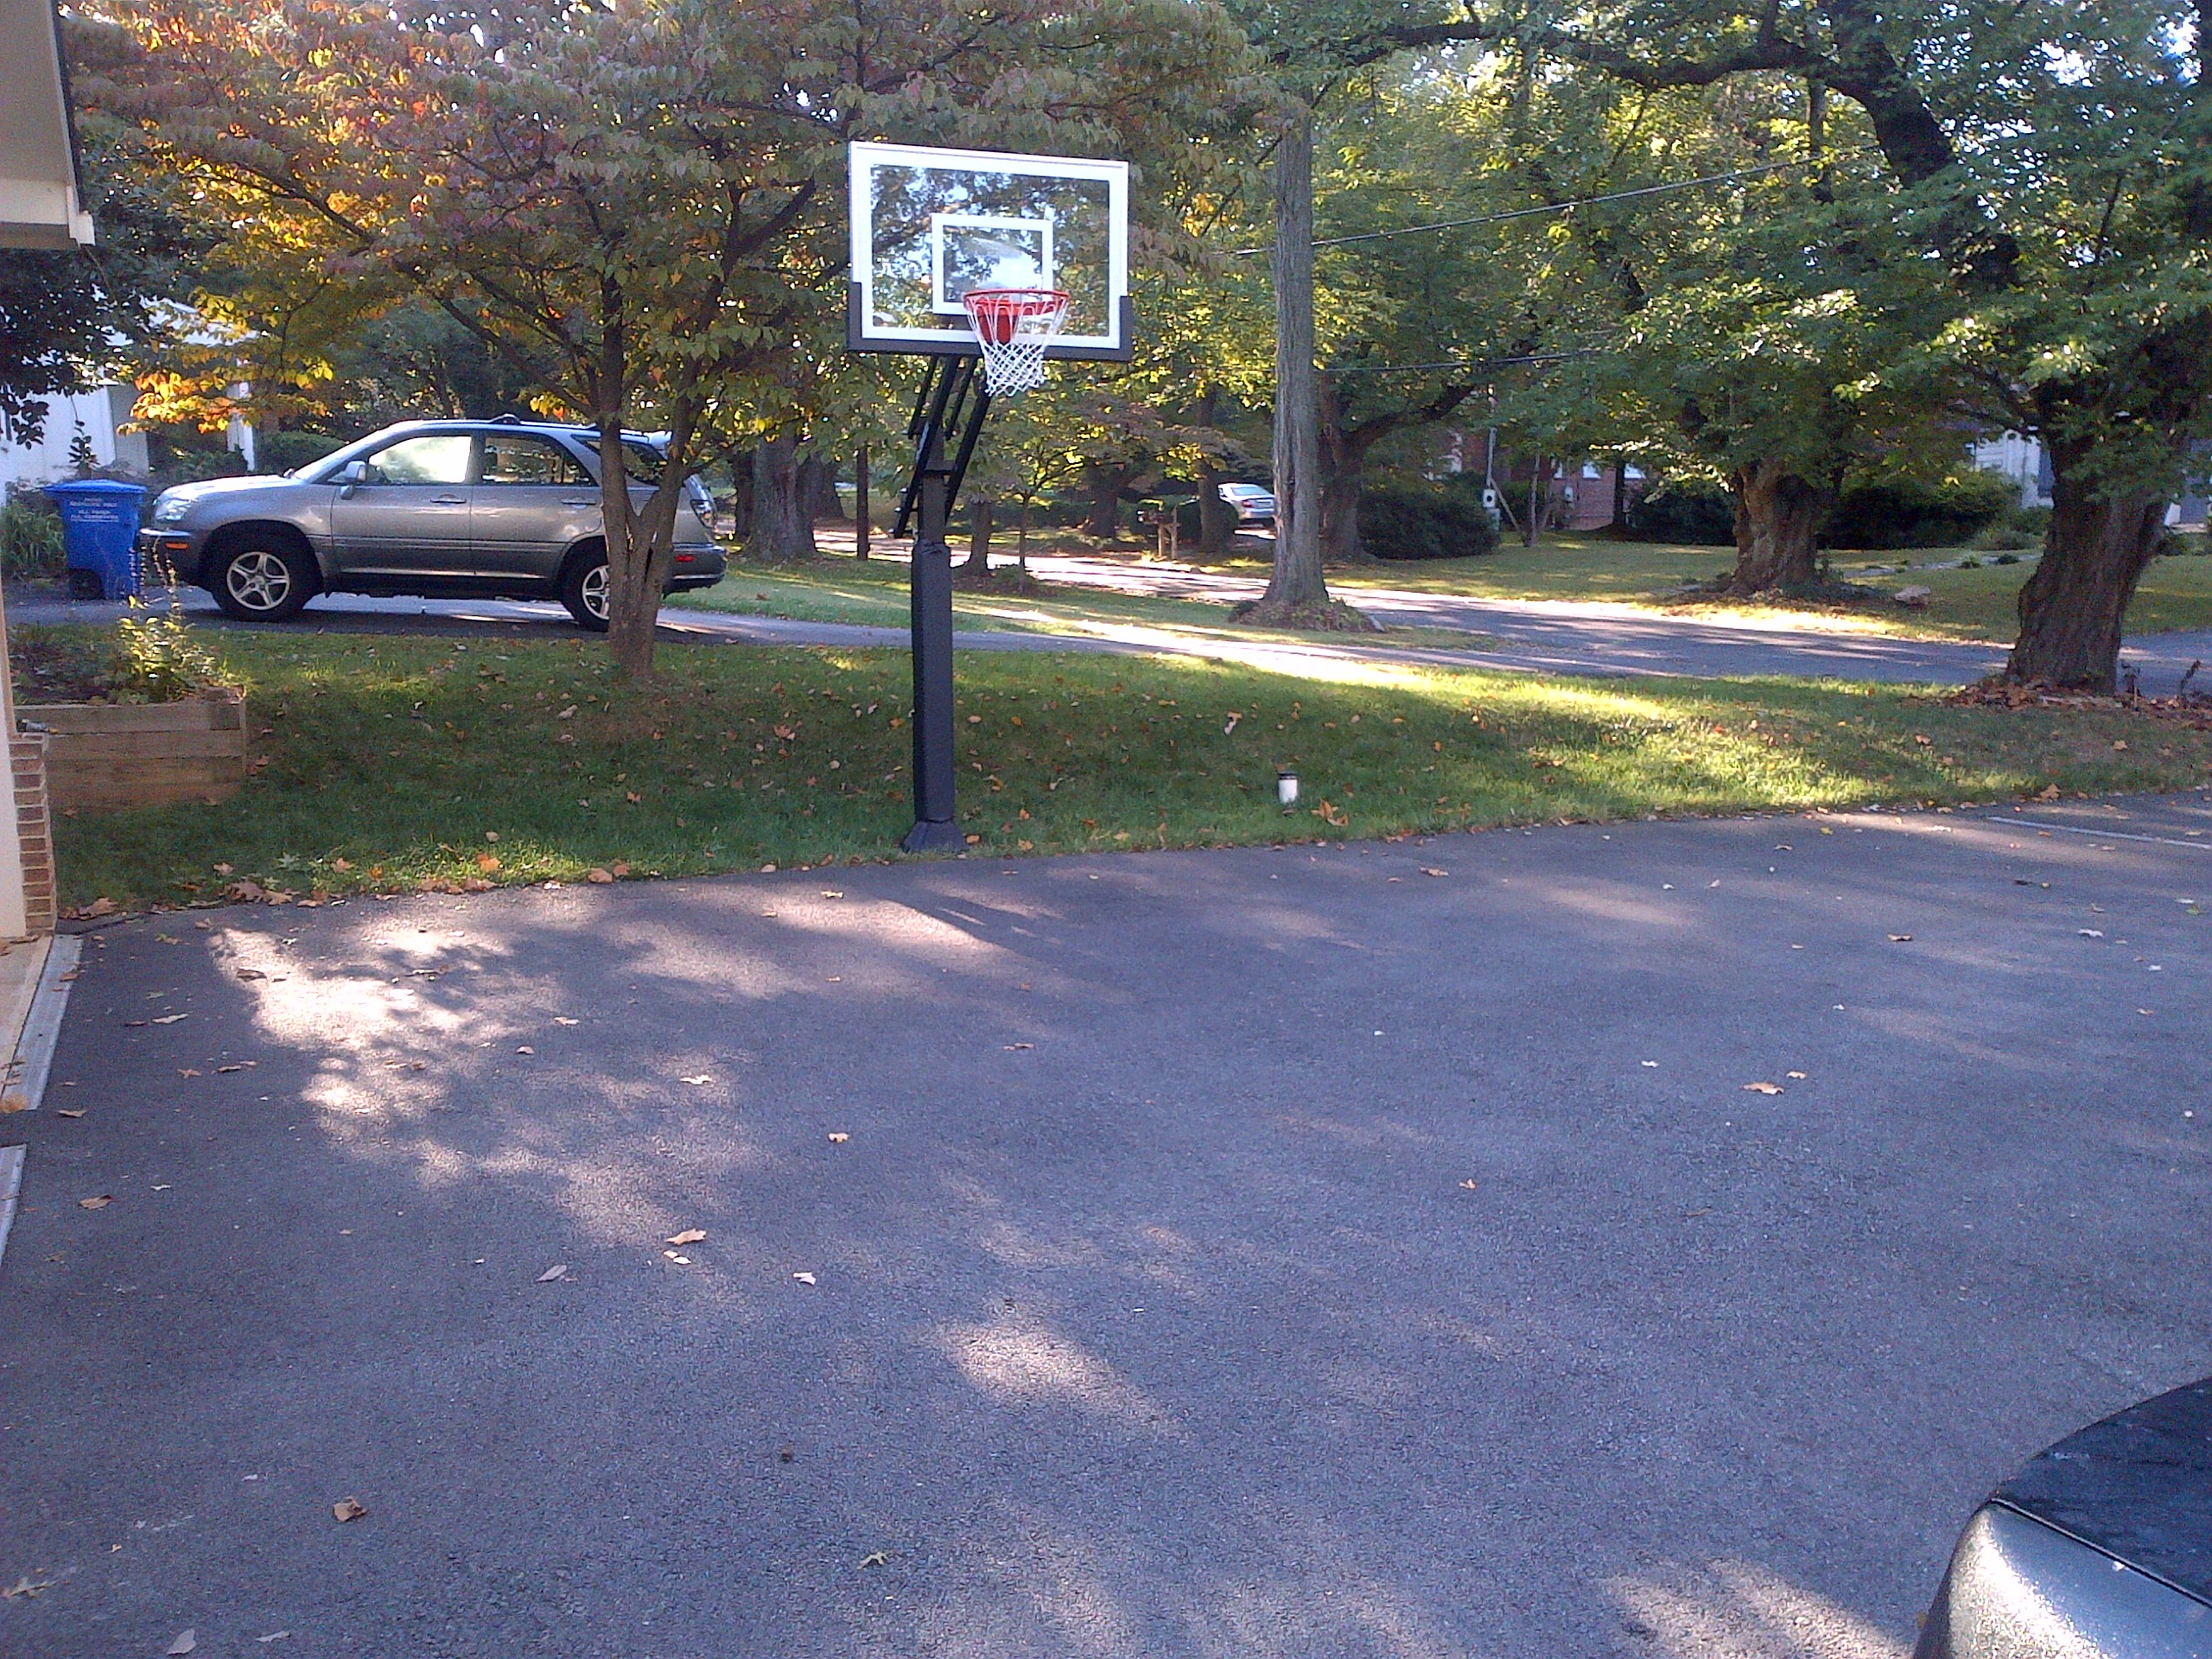 There is a Pro Dunk Silver Basketball that is assembled nicely on the side of the asphalt concrete driveway in front of his residence.